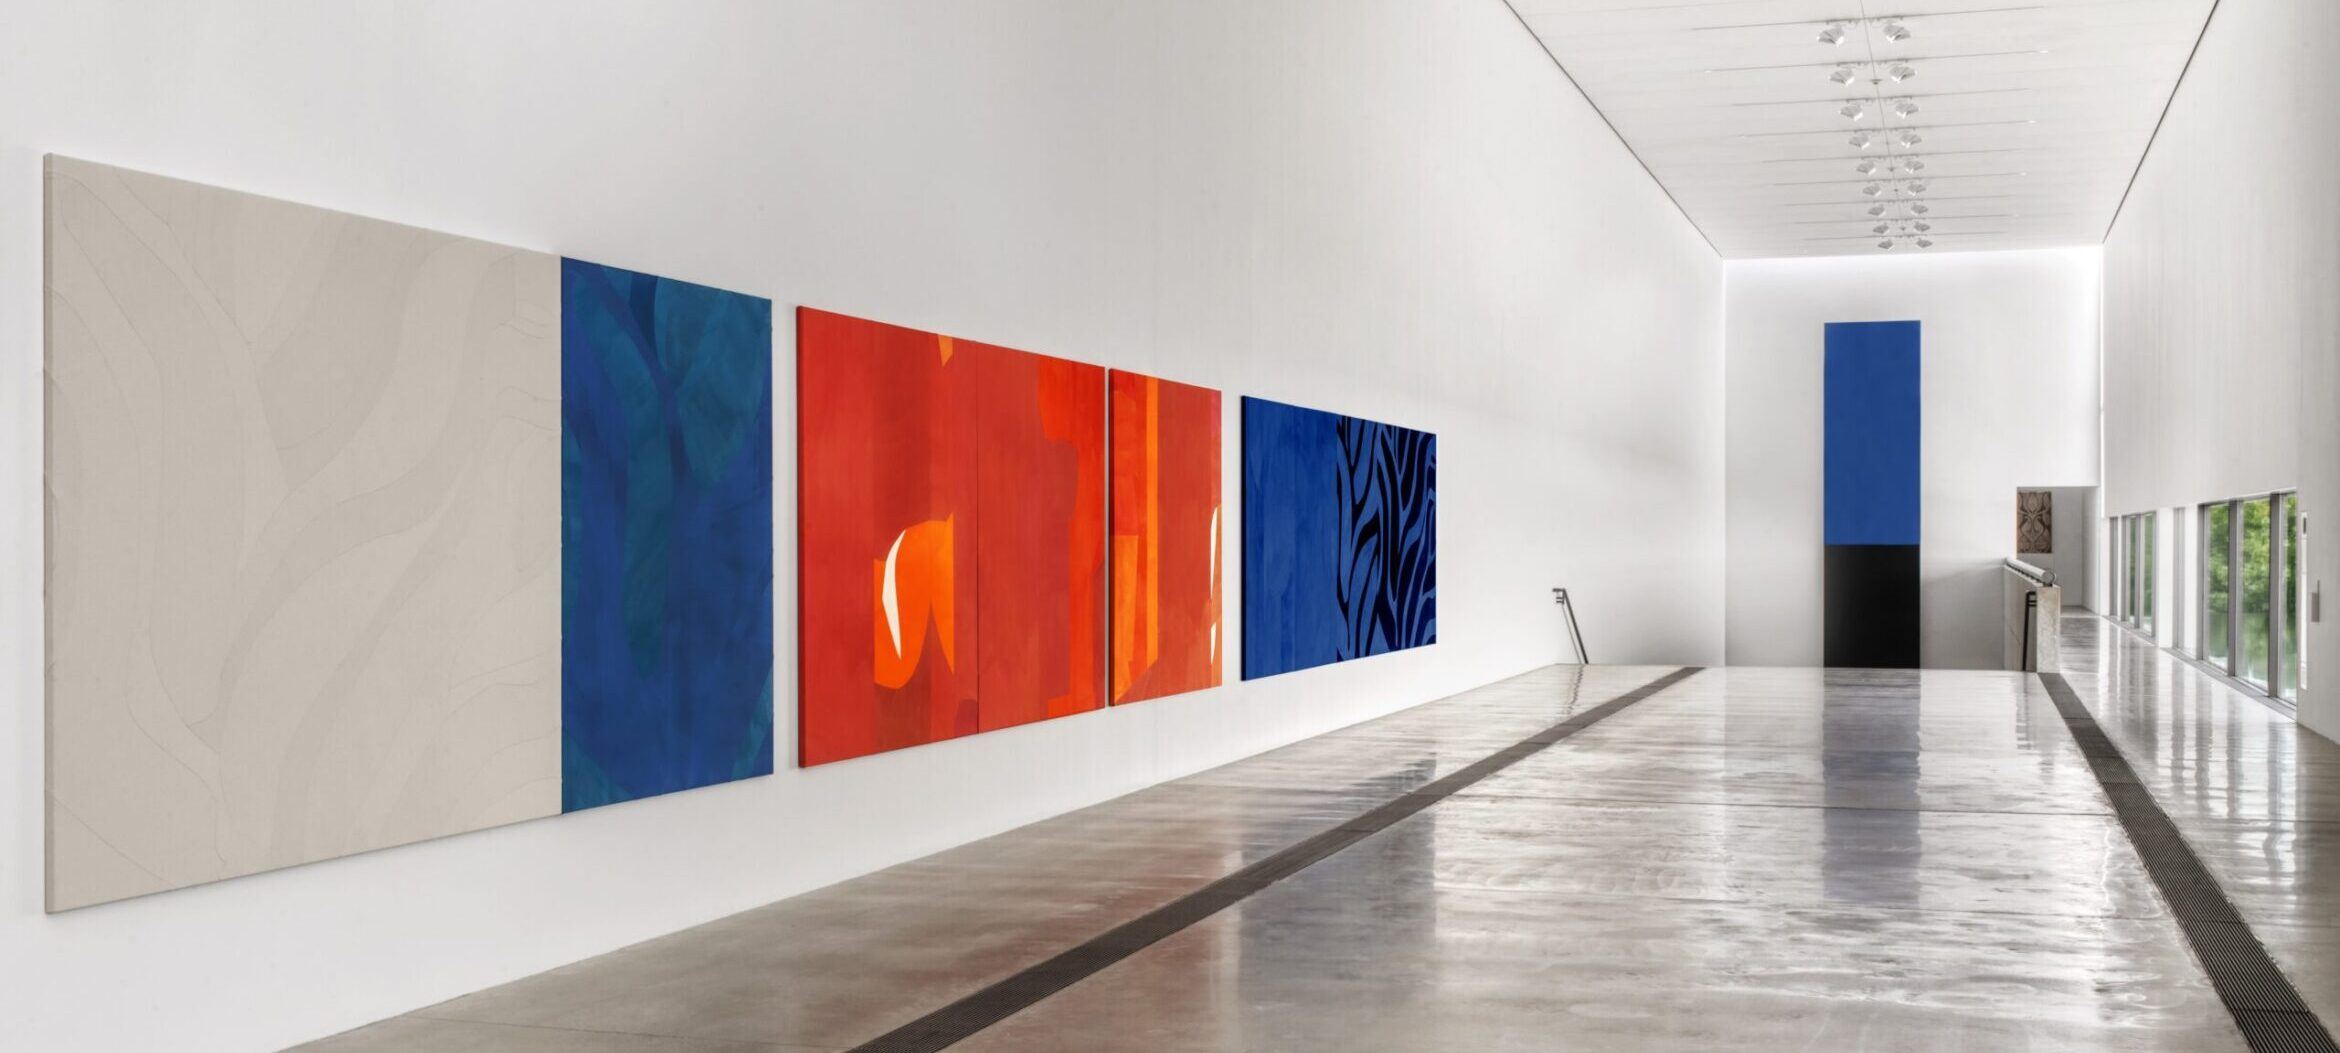 Installation view of Sarah Crowner paintings and Ellsworth Kelly's "Blue Black" painting.